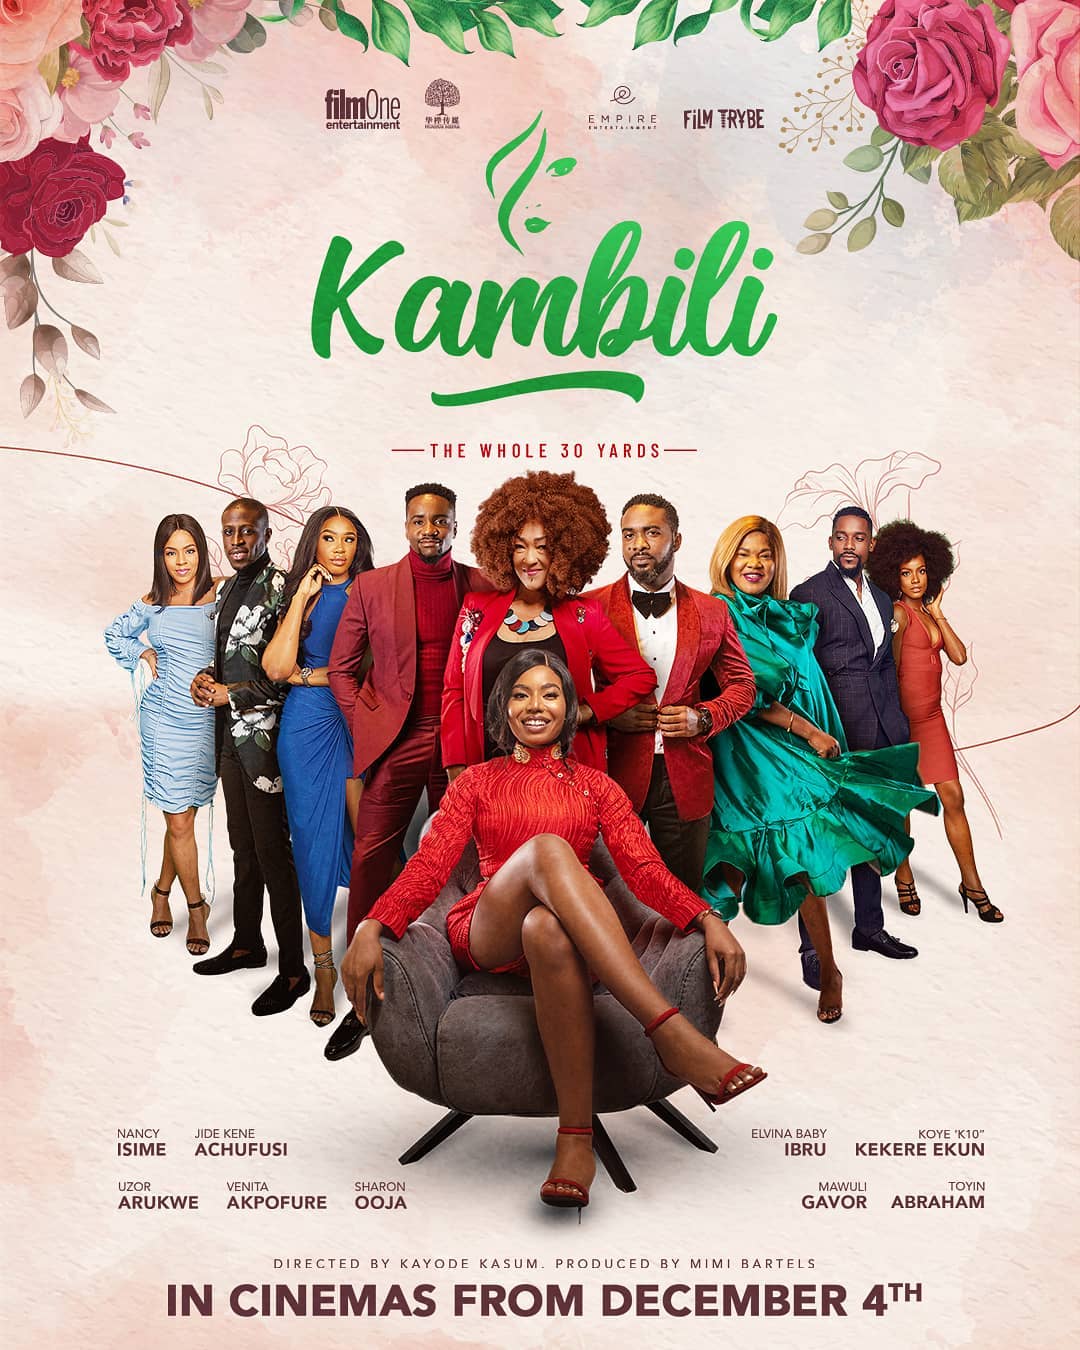 126986673 480165629612794 2853004527851913298 n - 7 Nollywood Titles Set to Clash For Box Office December 4th & 11th 2020